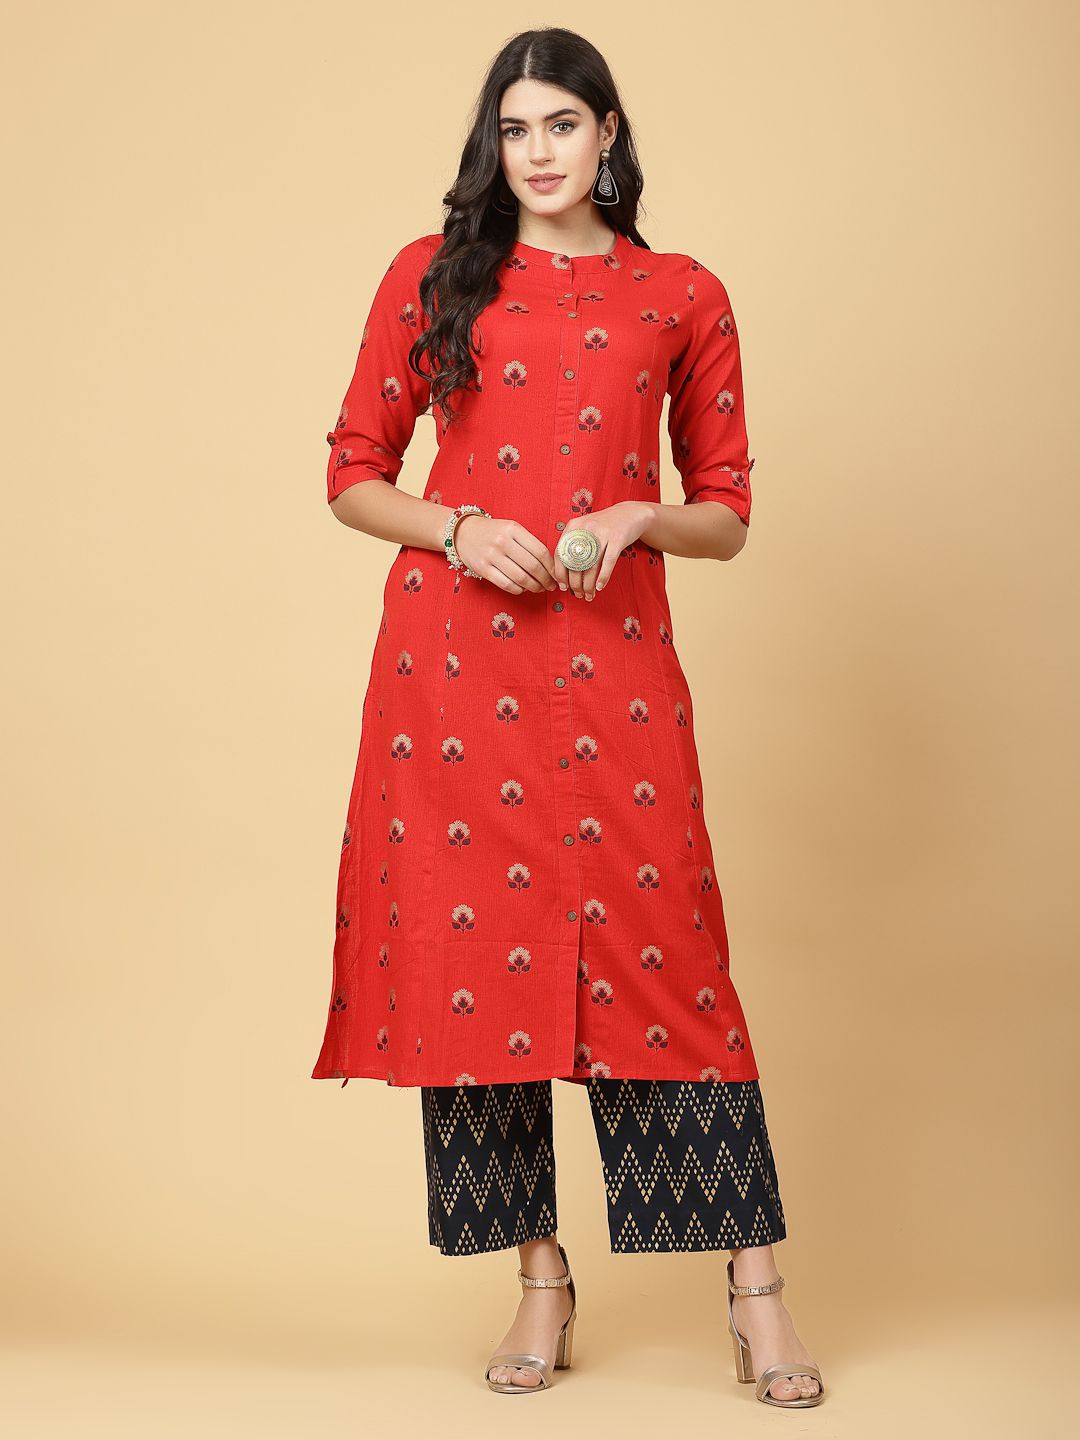     			Pistaa Cotton Printed Kurti With Palazzo Women's Stitched Salwar Suit - Red ( Pack of 1 )